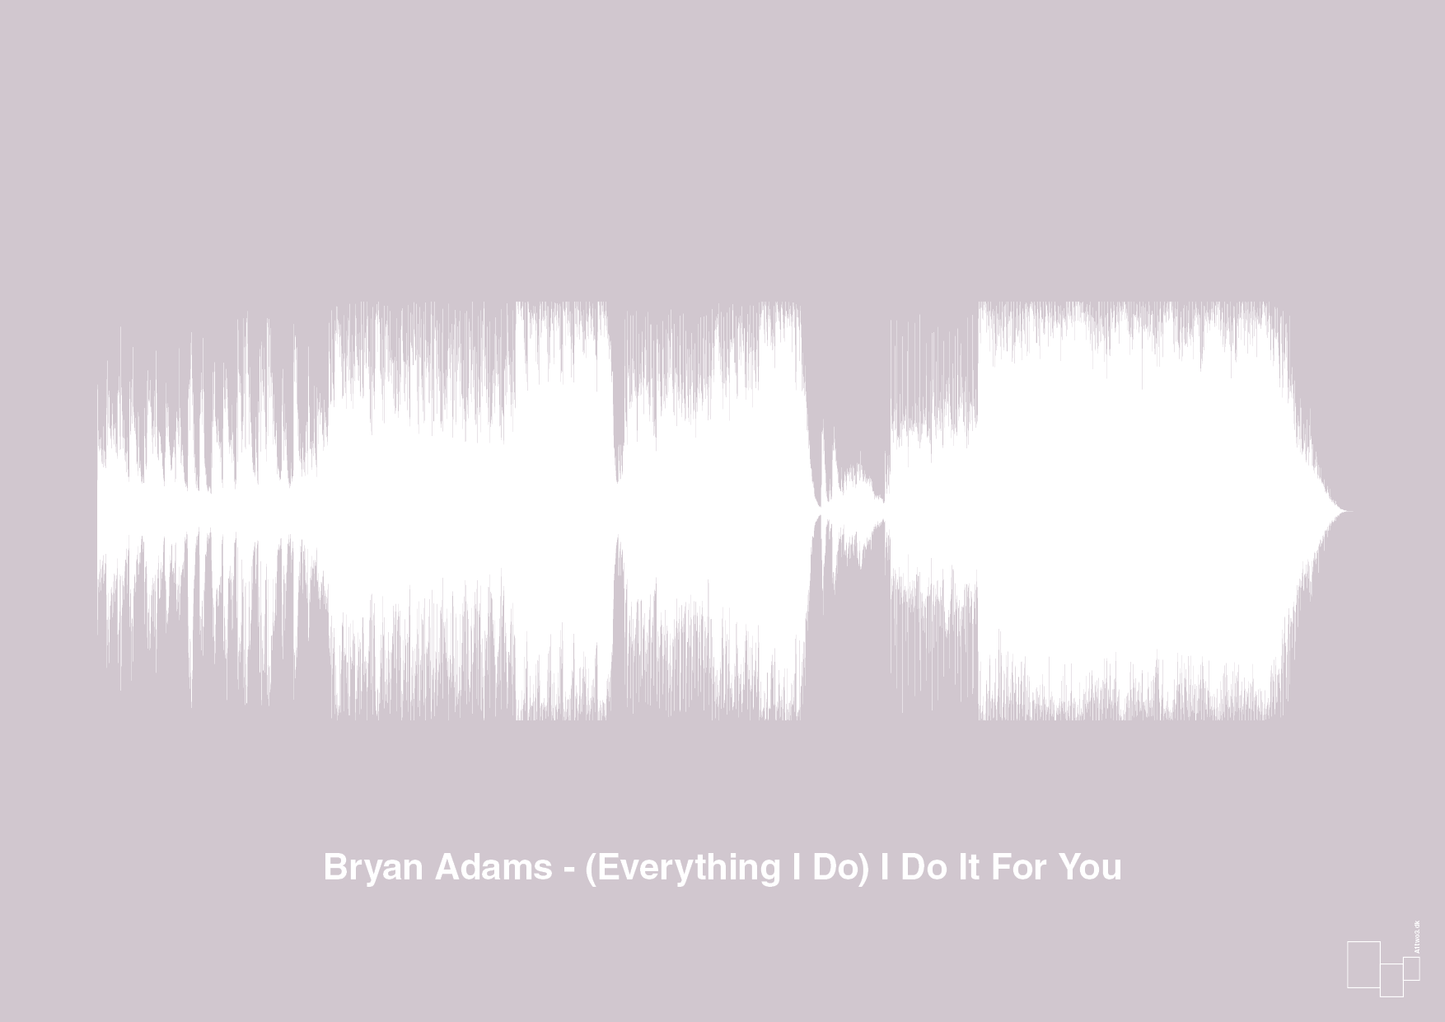 bryan adams - (everything i do) i do it for you - Plakat med Musik i Dusty Lilac